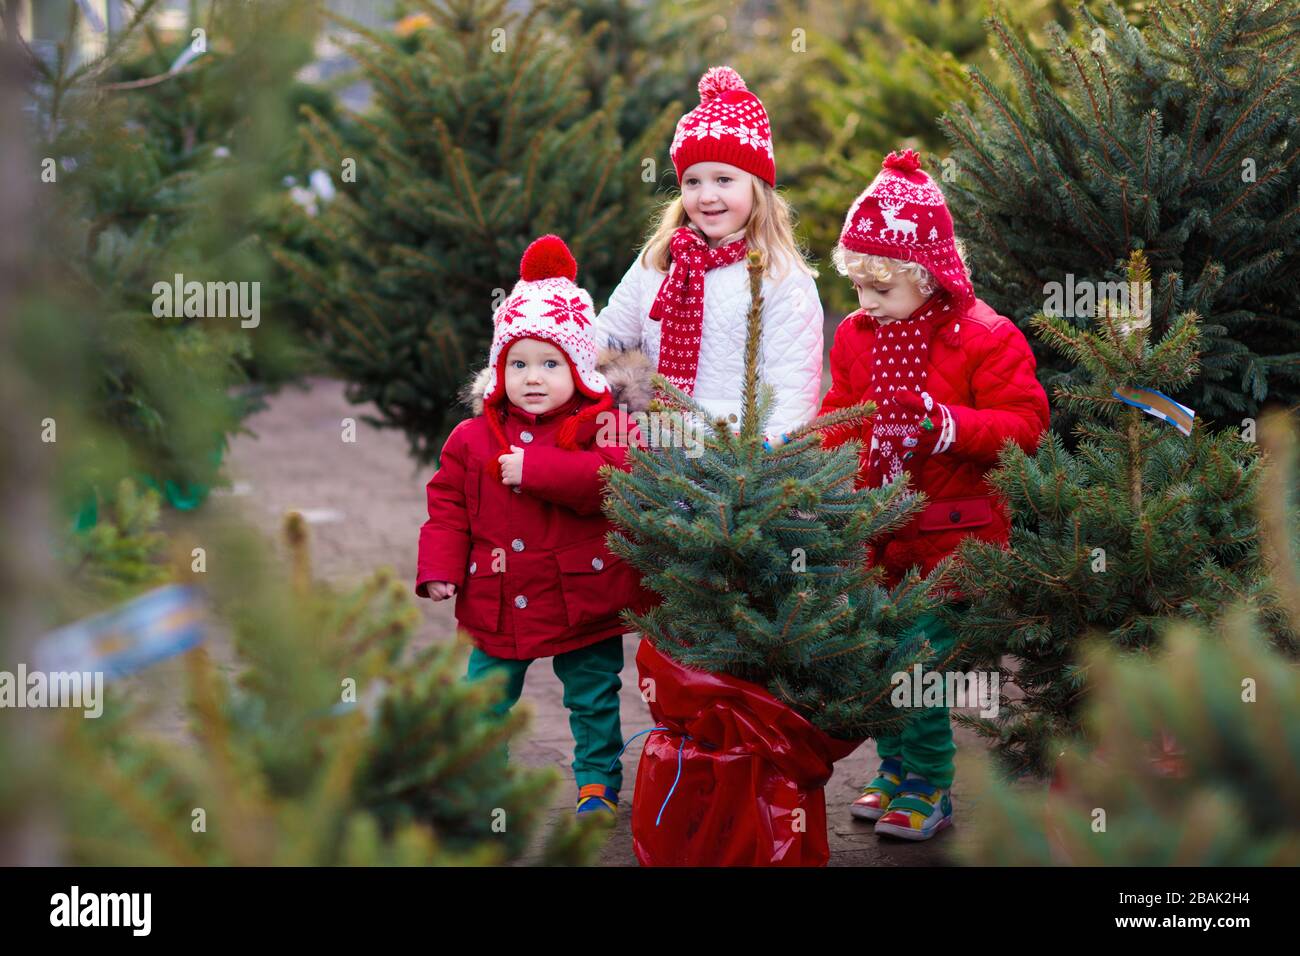 Family selecting Christmas tree. Kids choosing freshly cut Norway Xmas tree at outdoor lot. Children buying gifts at winter fair. Boy and girl shoppin Stock Photo